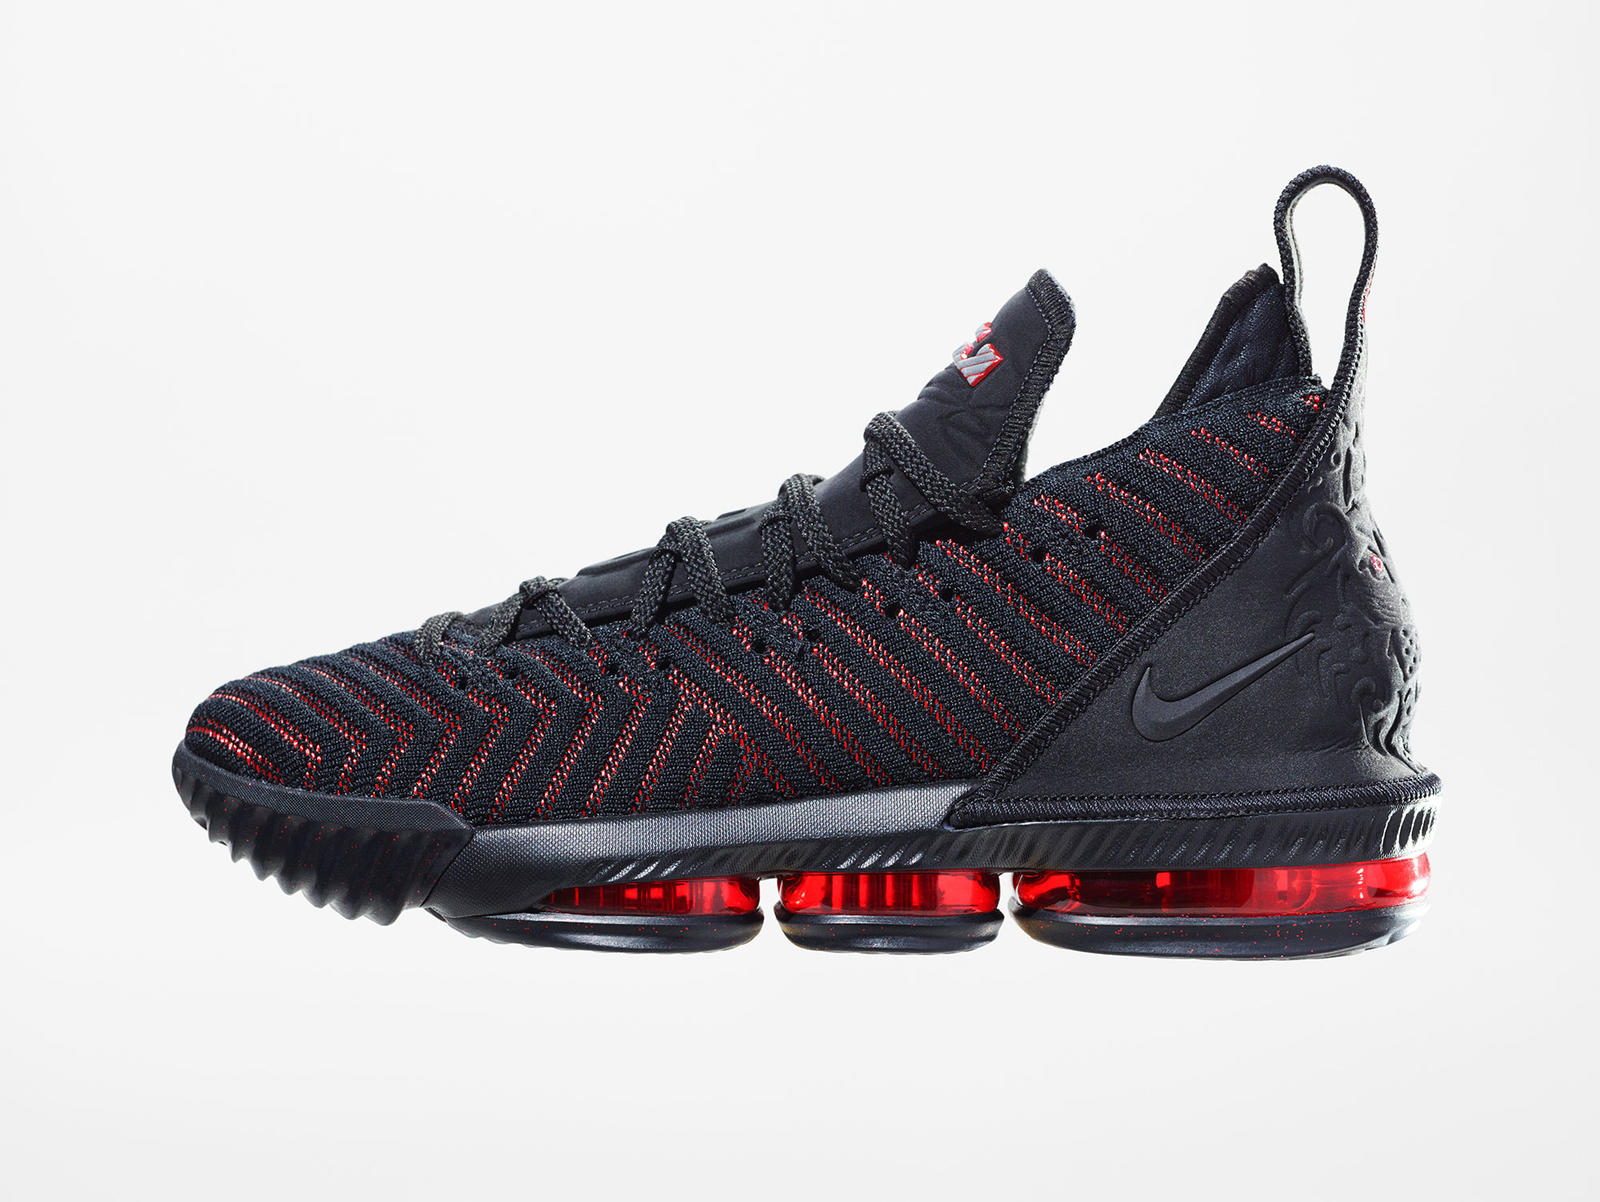 lebron 16 fresh bred Archives - WearTesters